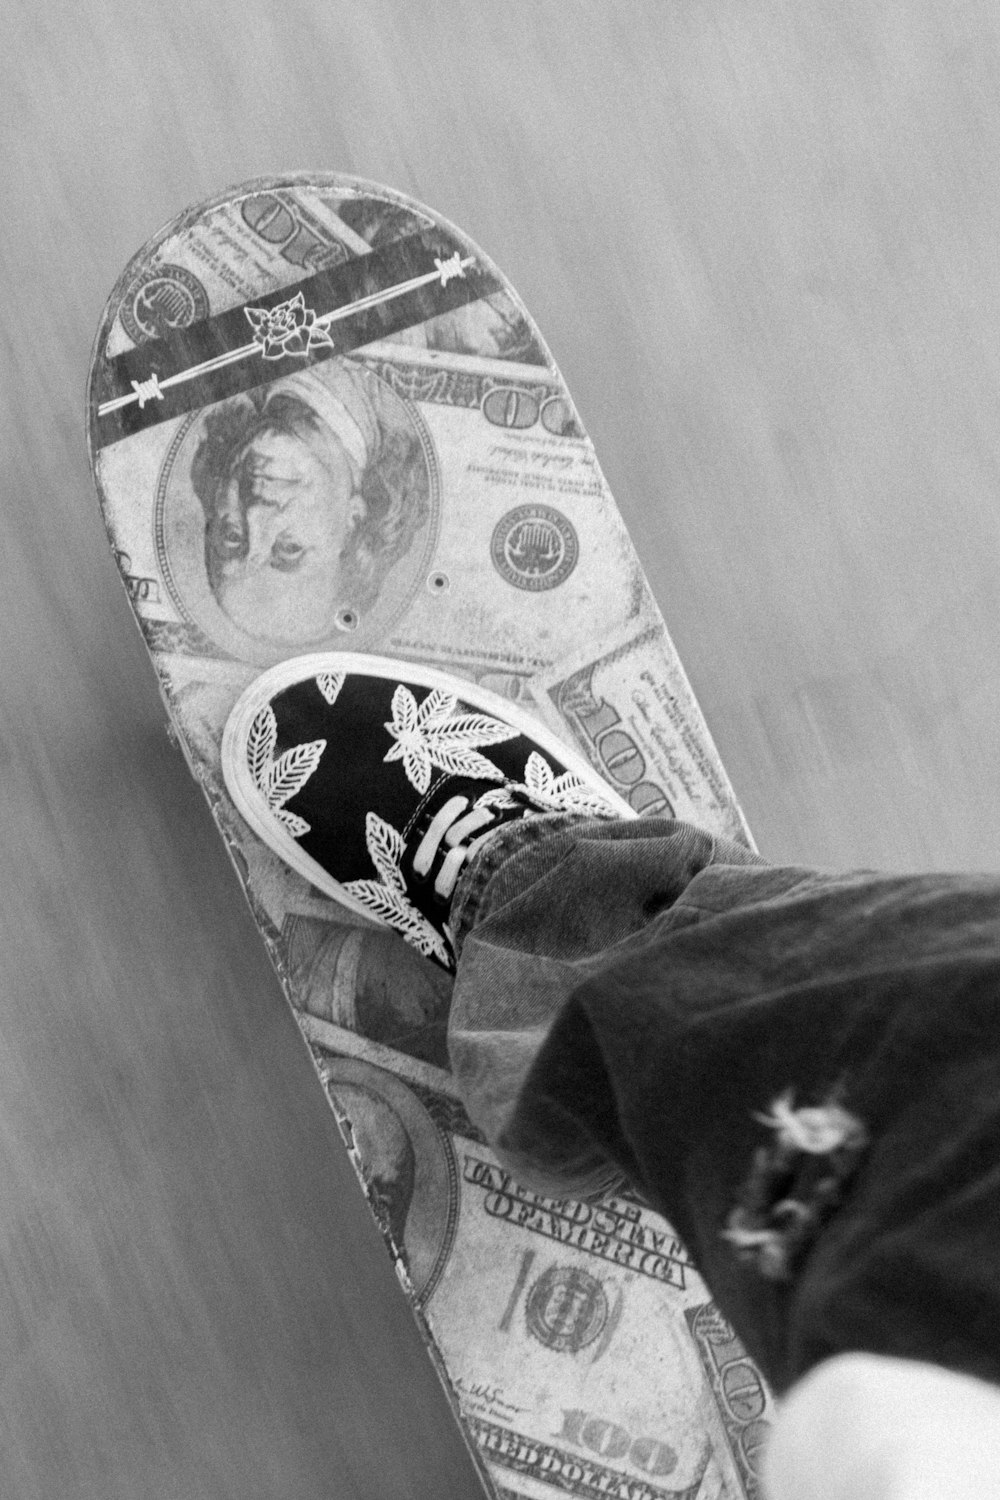 a person is standing on a skateboard with money on it